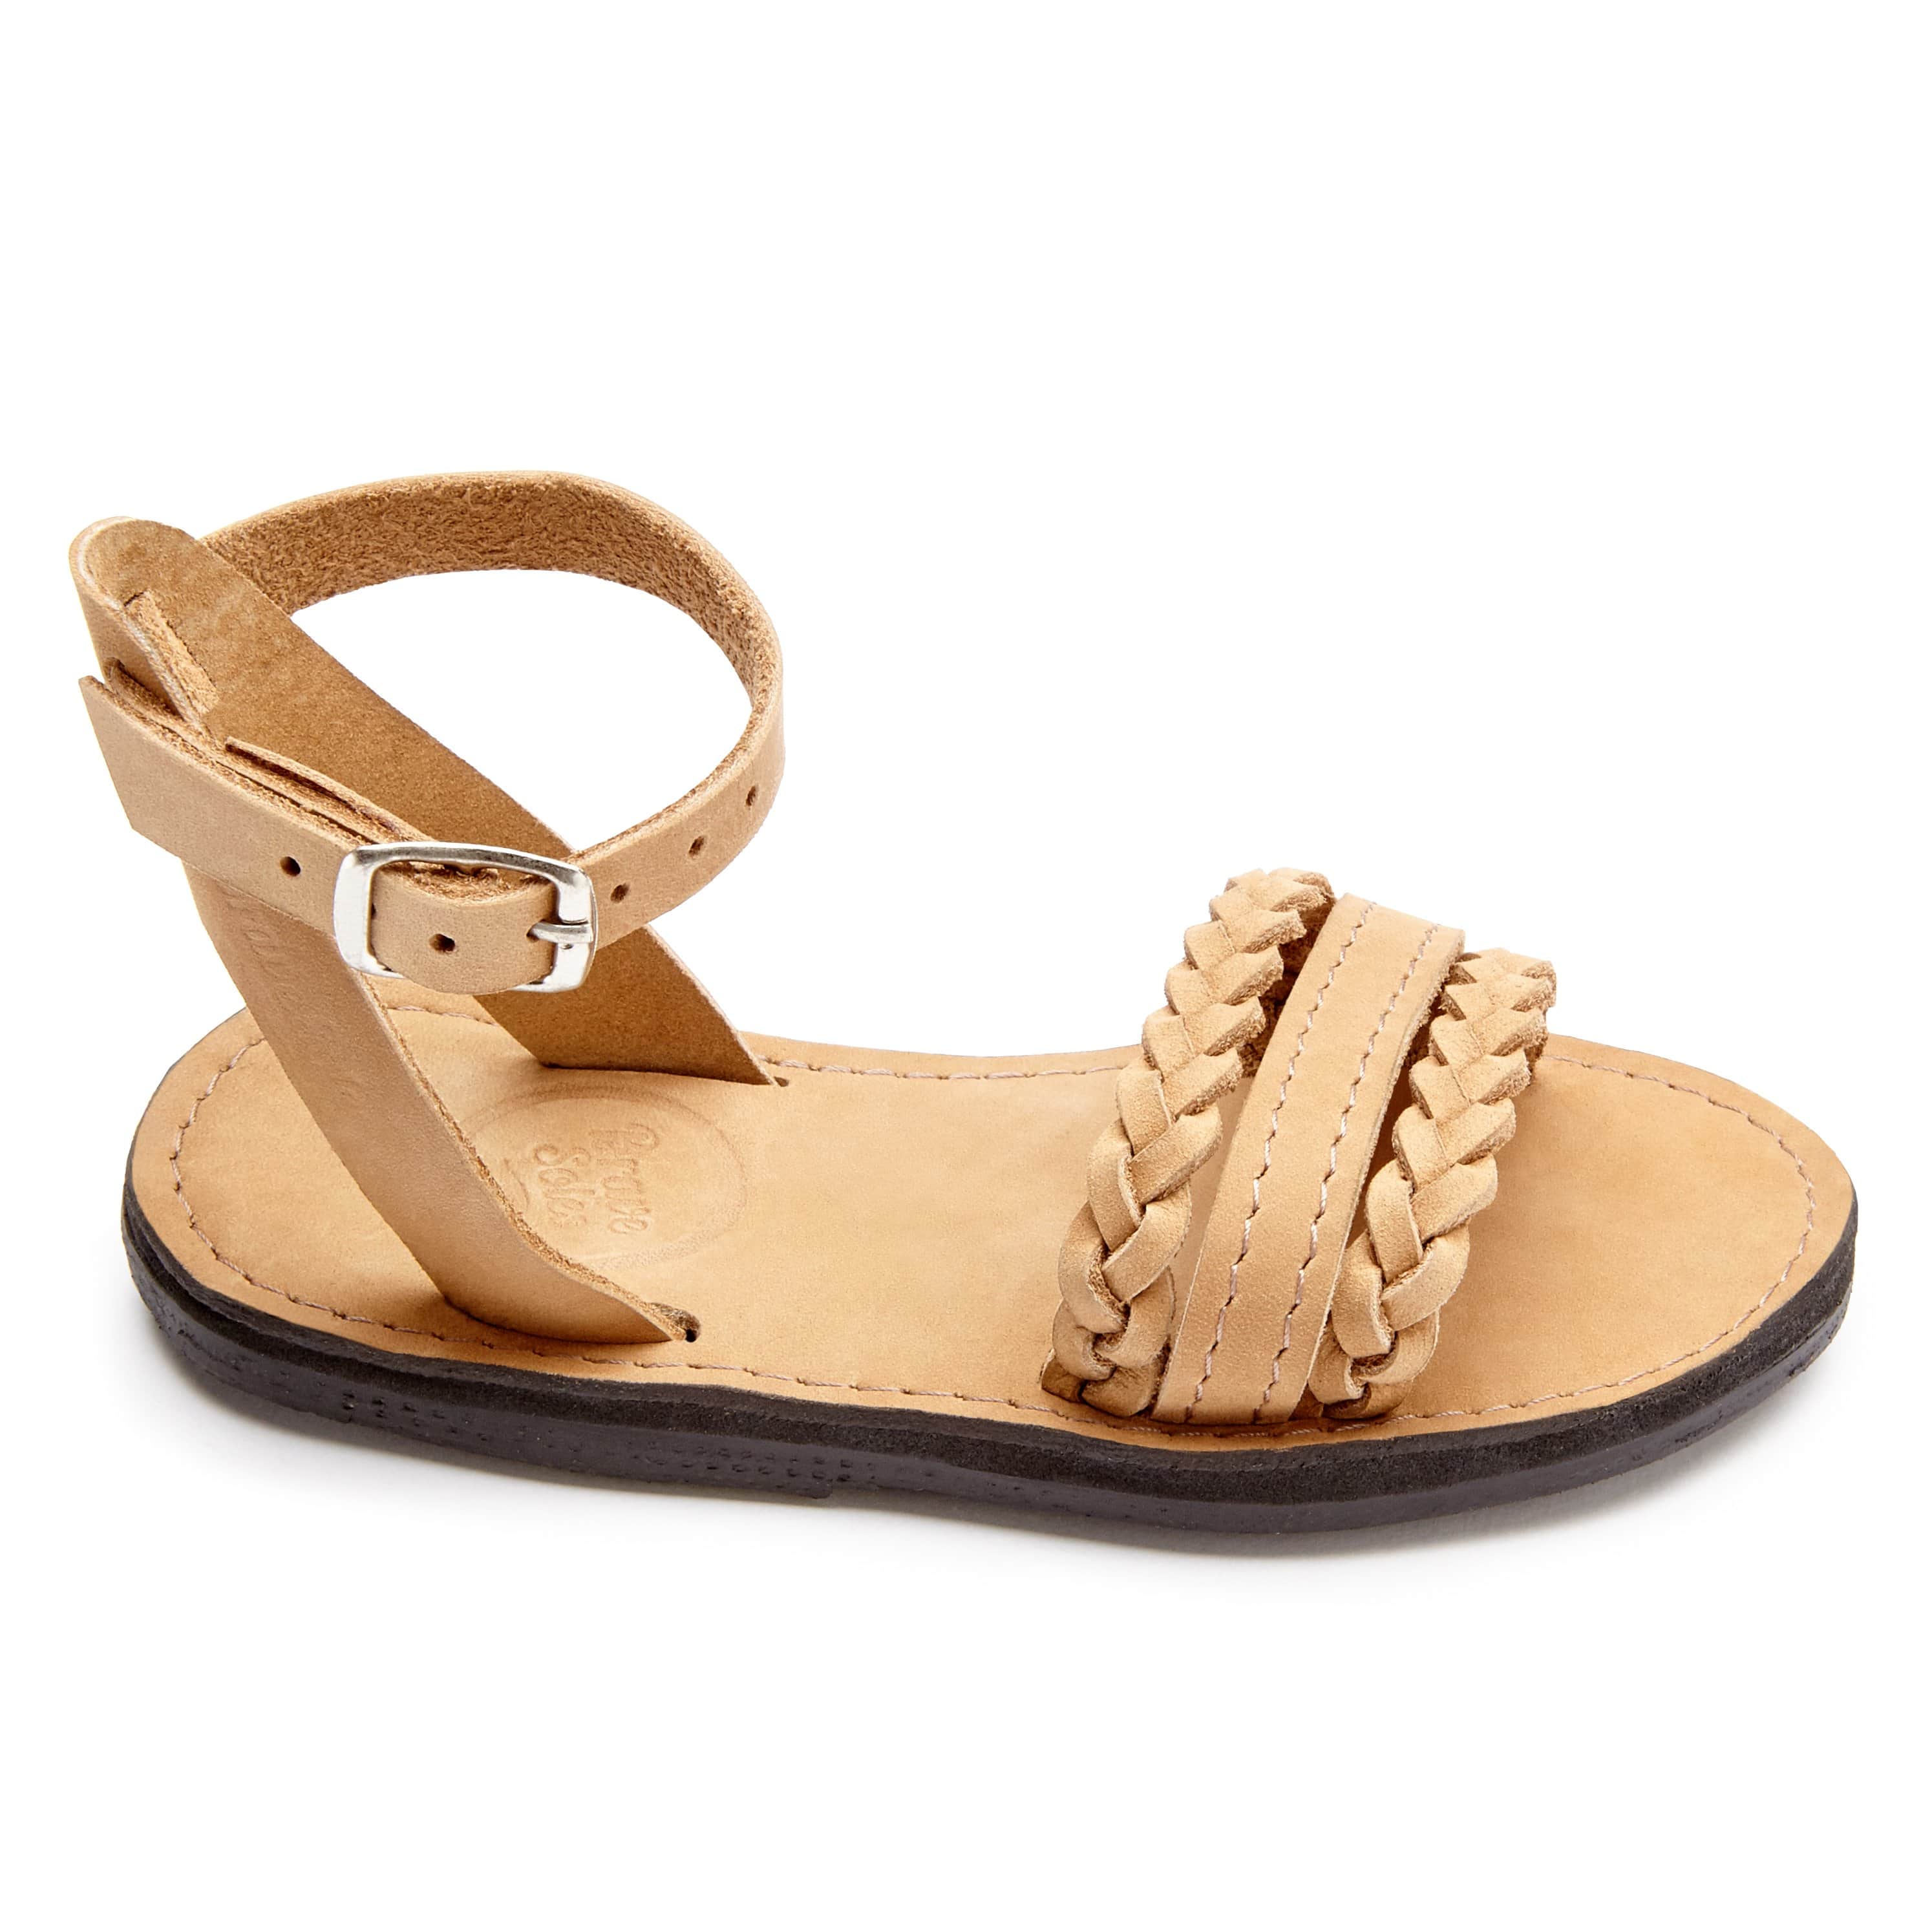 The Chica Bohemia Girl&#39;s Leather Sandal Sandals Brave Soles 